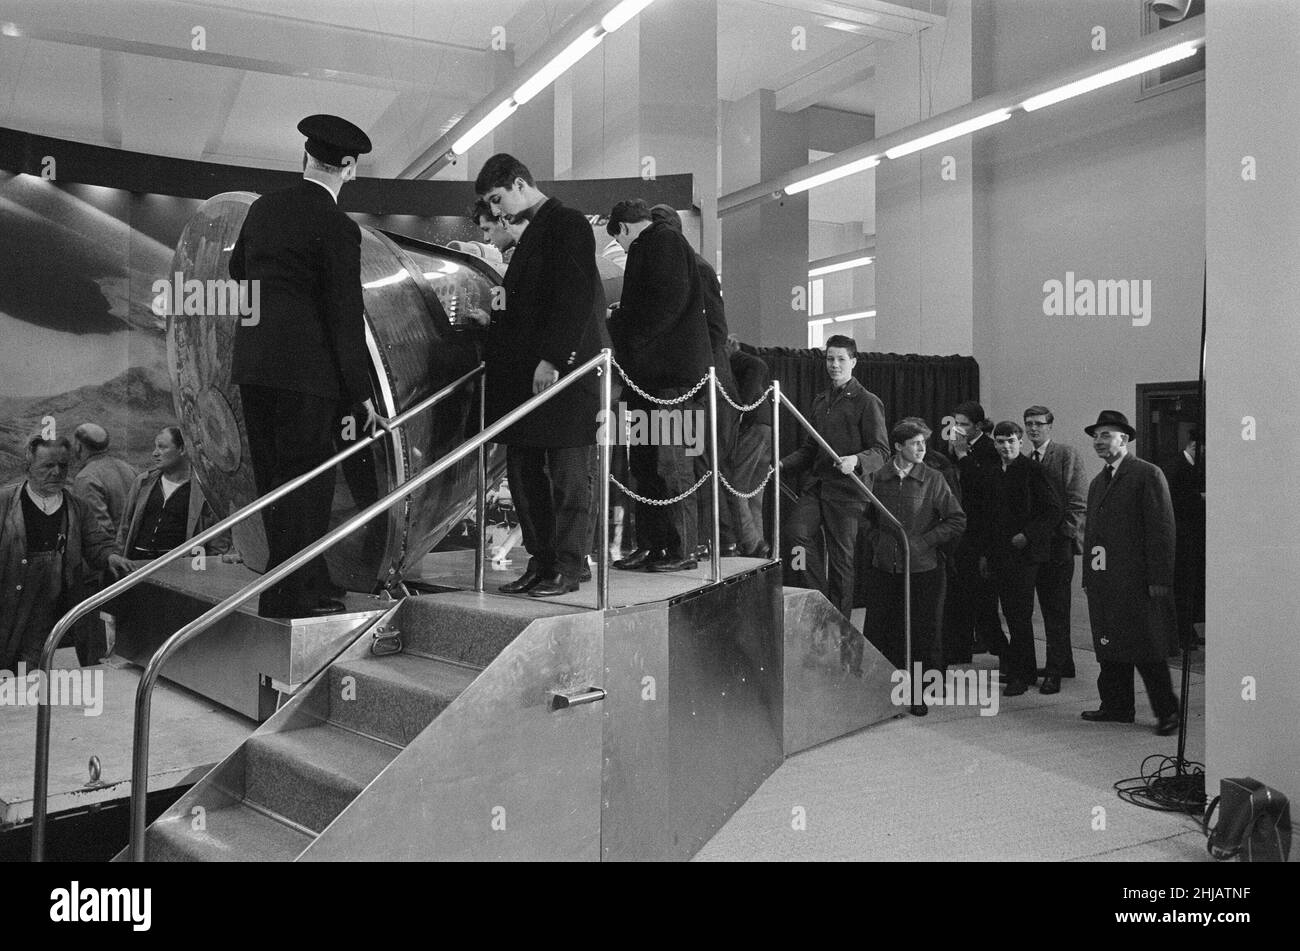 Members of the public patiently wait to take a look at Mercury spacecraft Friendship 7, pictured on arrival at the Science Museum, London, Monday 14th May 1962. The space capsule was piloted by astronaut John Glenn (20/02/1962), who performed three orbits of the Earth, making him the first US astronaut to orbit the Earth and the third US astronaut in space (behind 1st Alan B. Shepard and 2nd Lieutenant Colonel Virgil Ivan Gus Grissom). Stock Photo